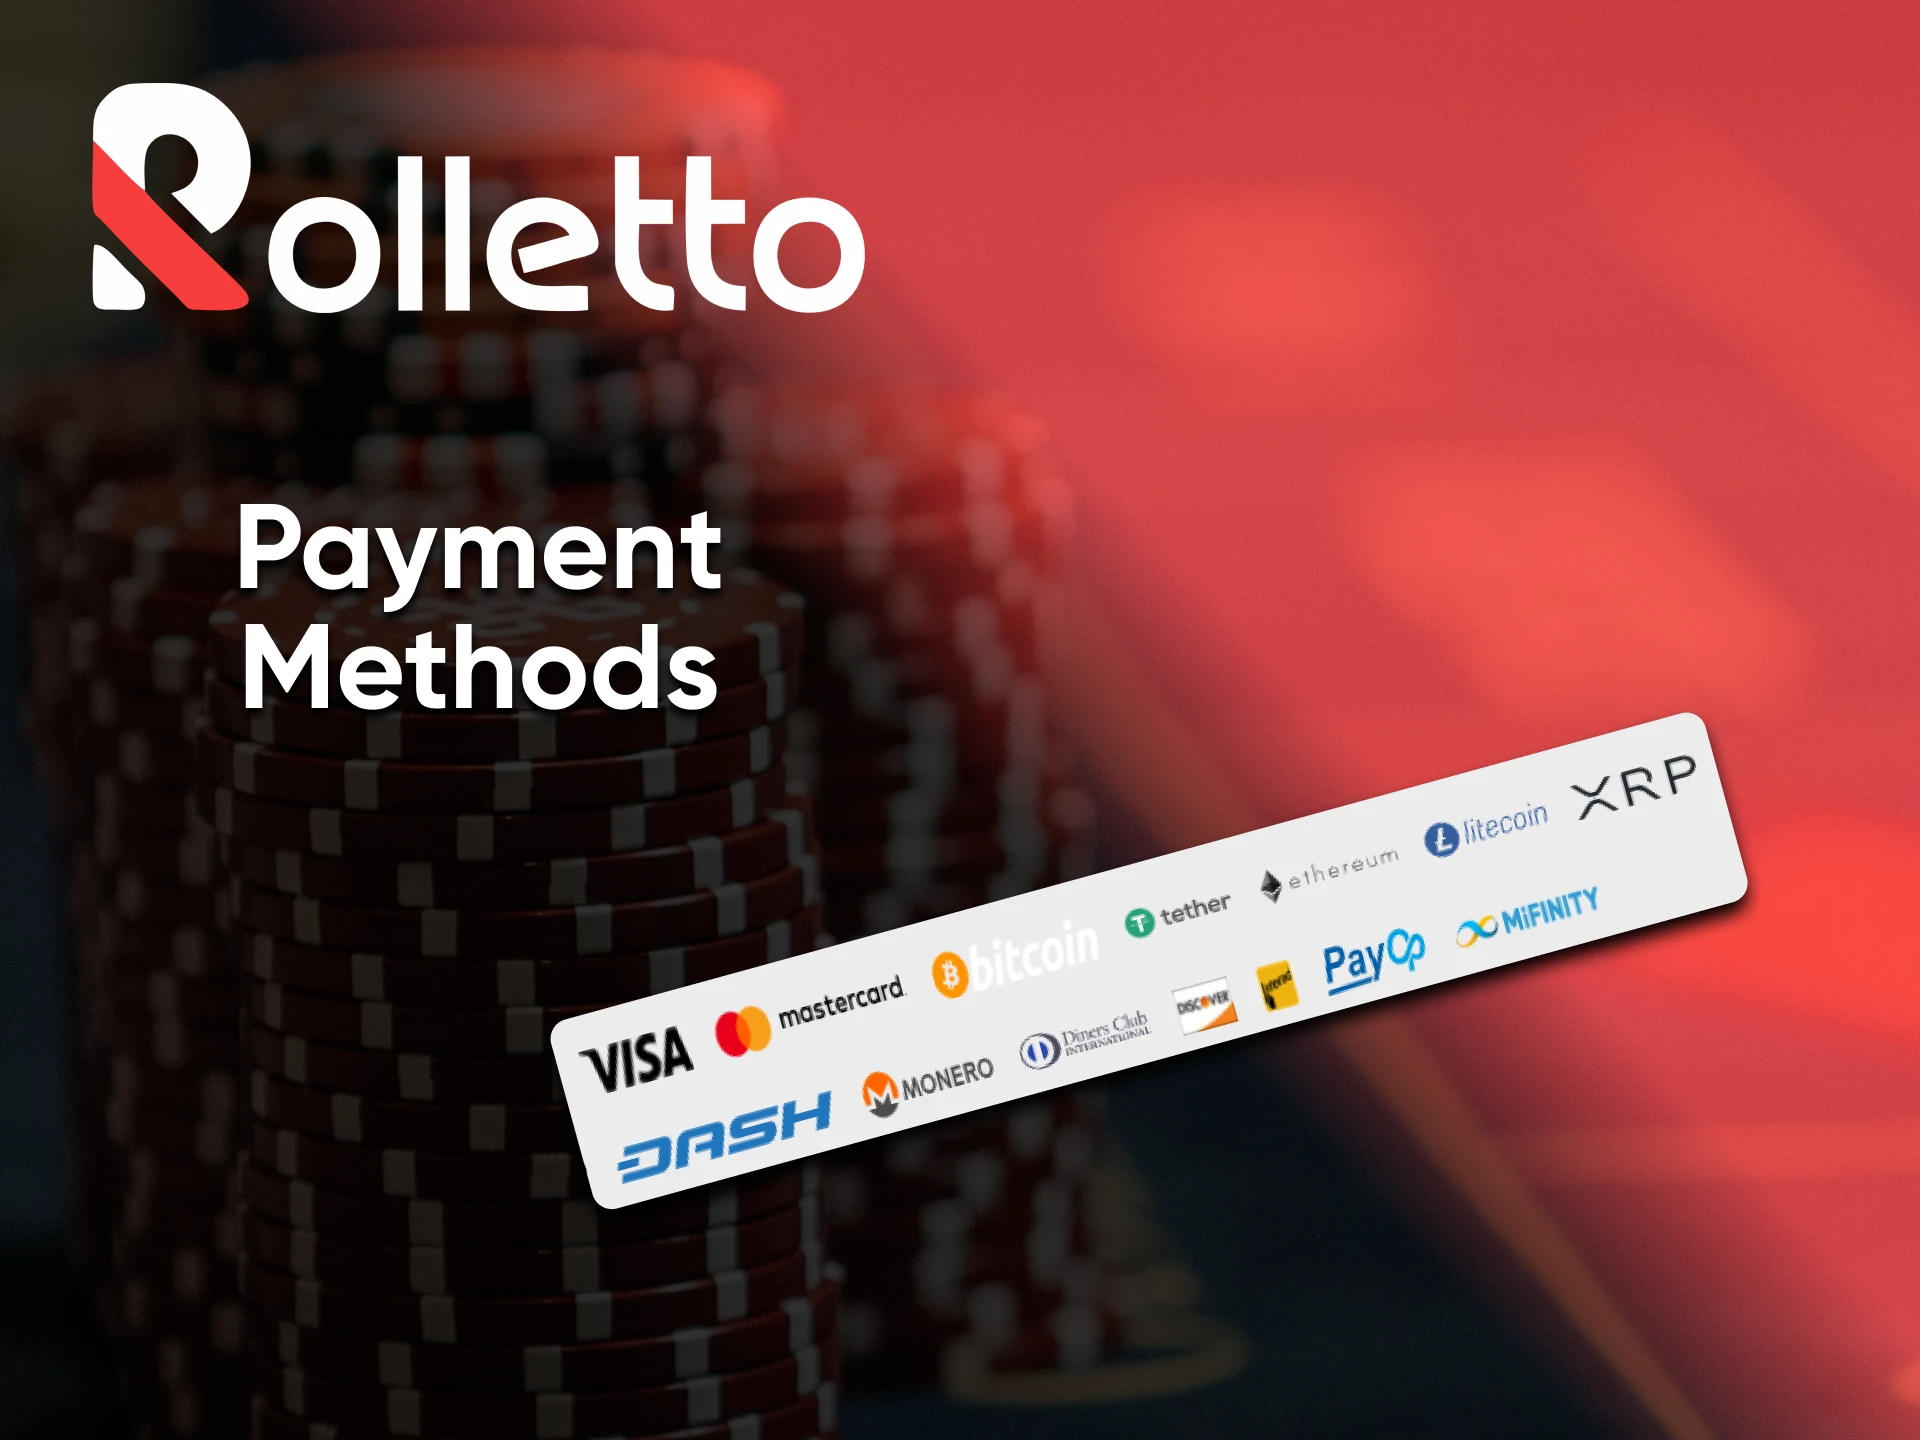 To start winning money at Rolletto casino, make a deposit in a convenient way.